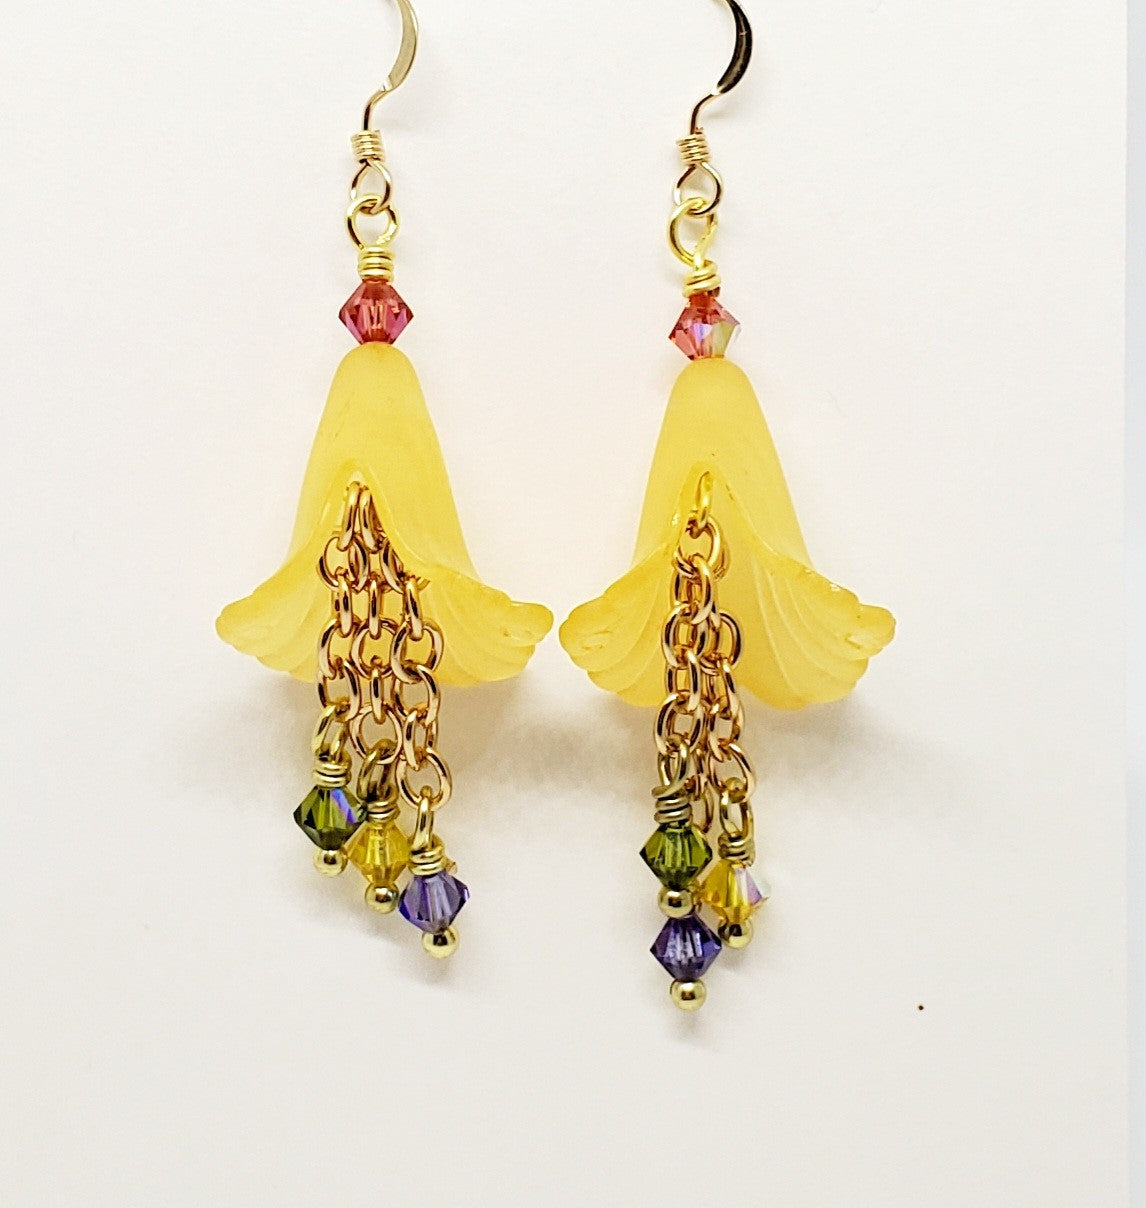 Saffron Flower Dangle Earrings with Crystals and Sterling Silver Ear Wires